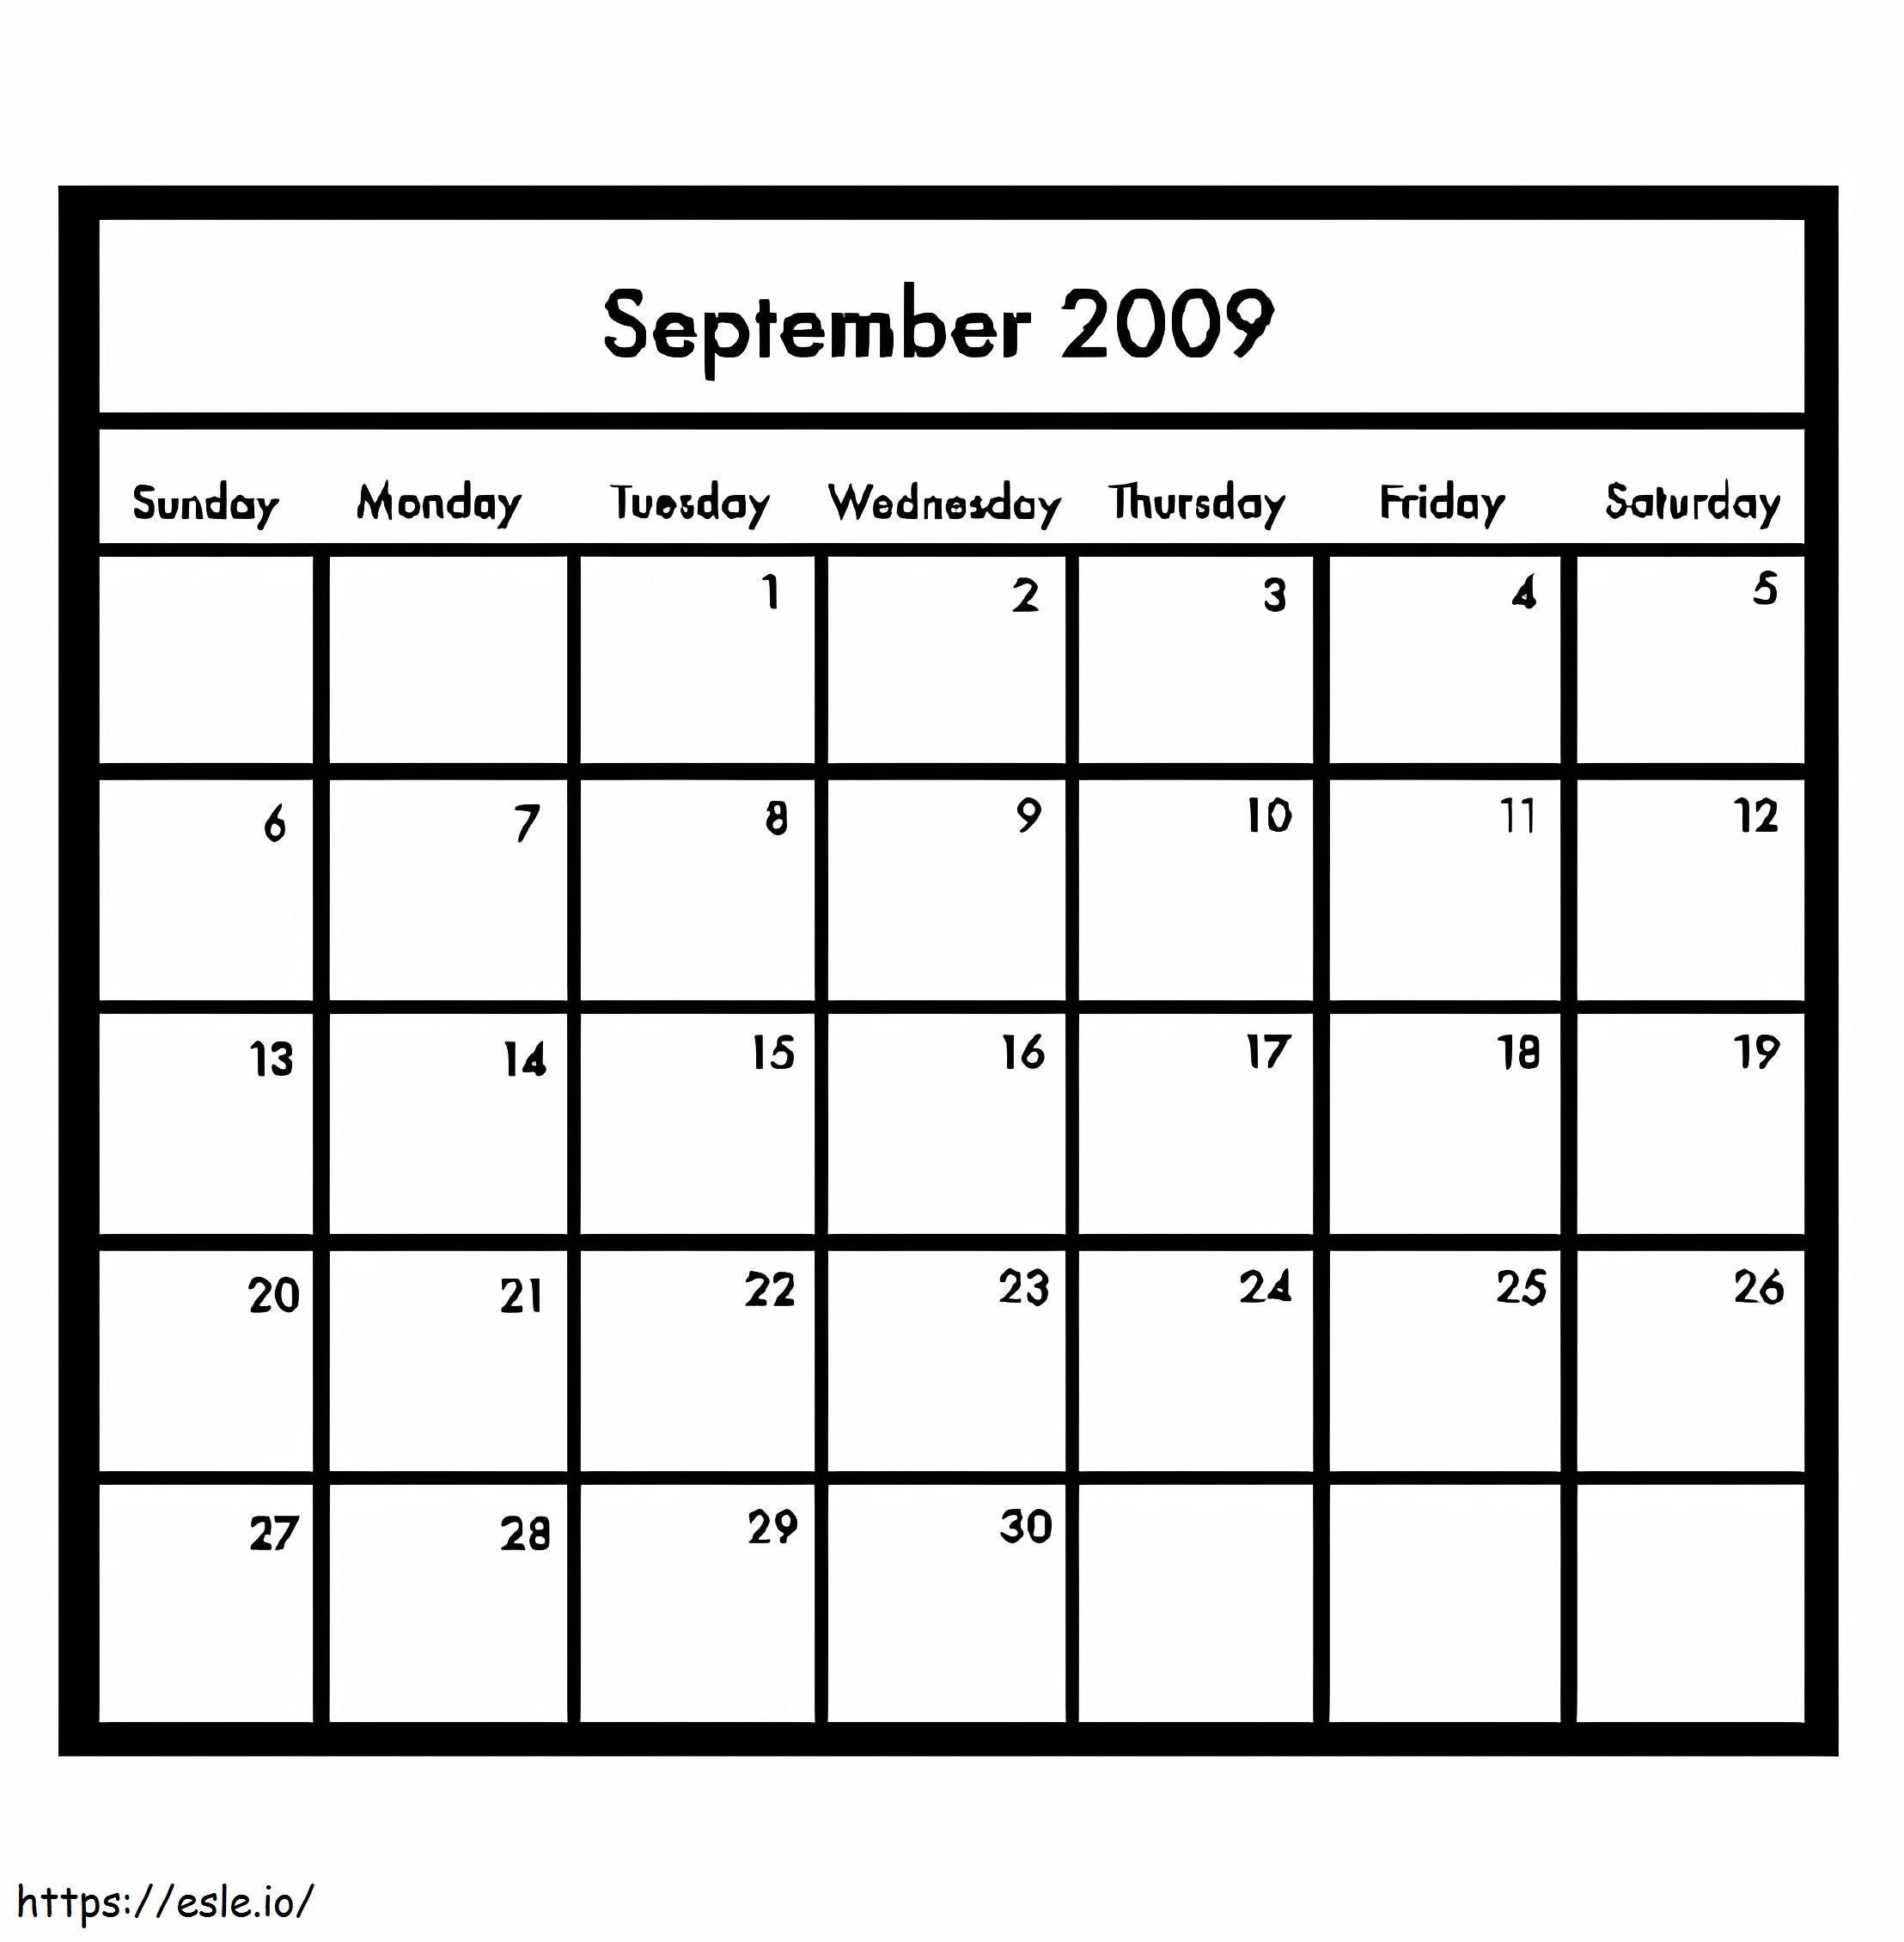 September 2009 Calendar coloring page